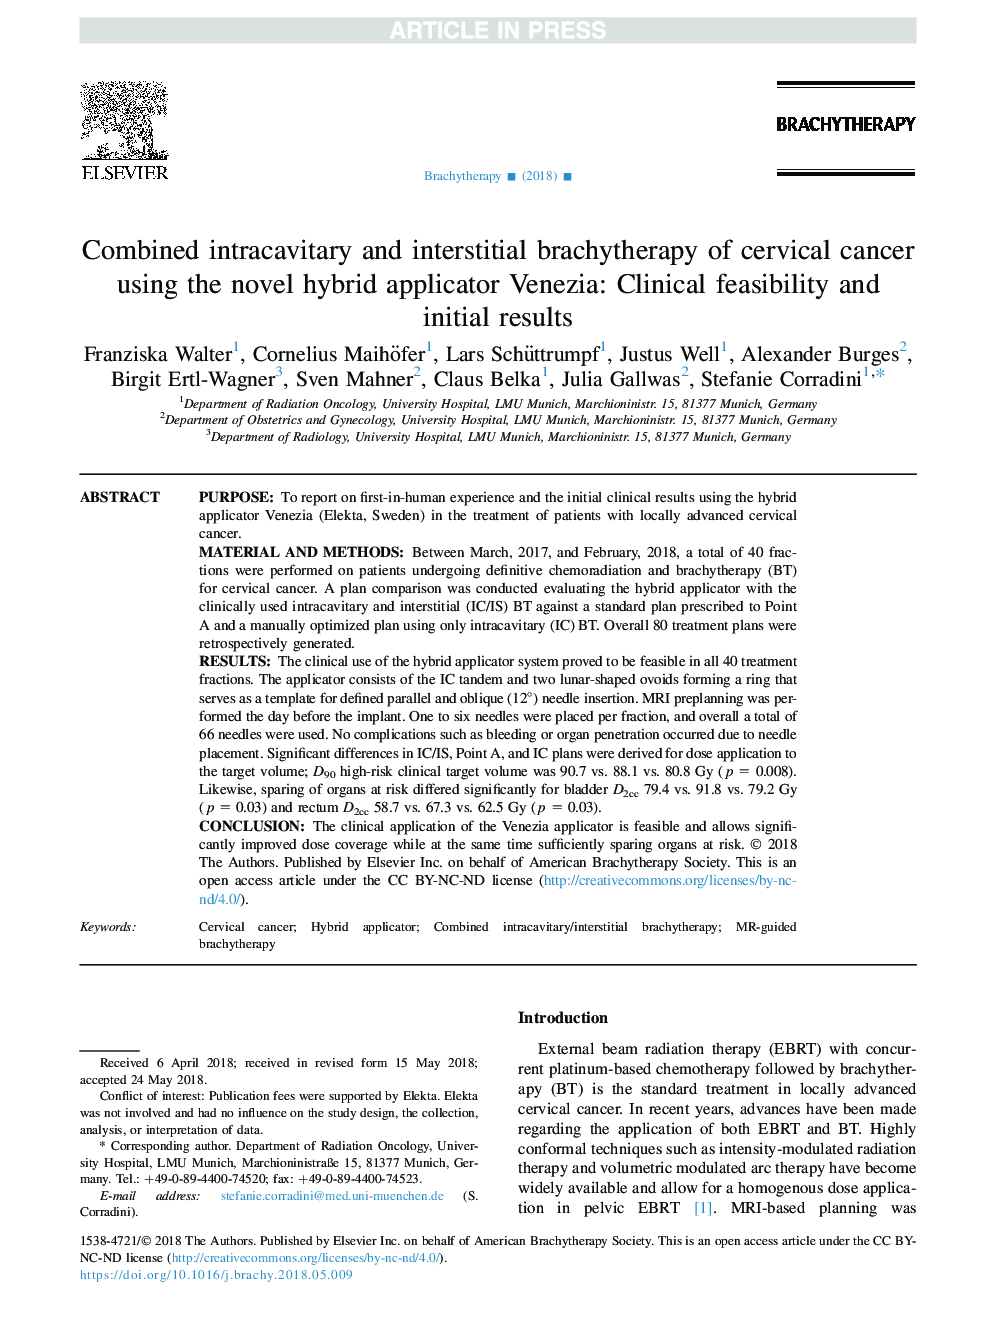 Combined intracavitary and interstitial brachytherapy of cervical cancer using the novel hybrid applicator Venezia: Clinical feasibility and initialÂ results